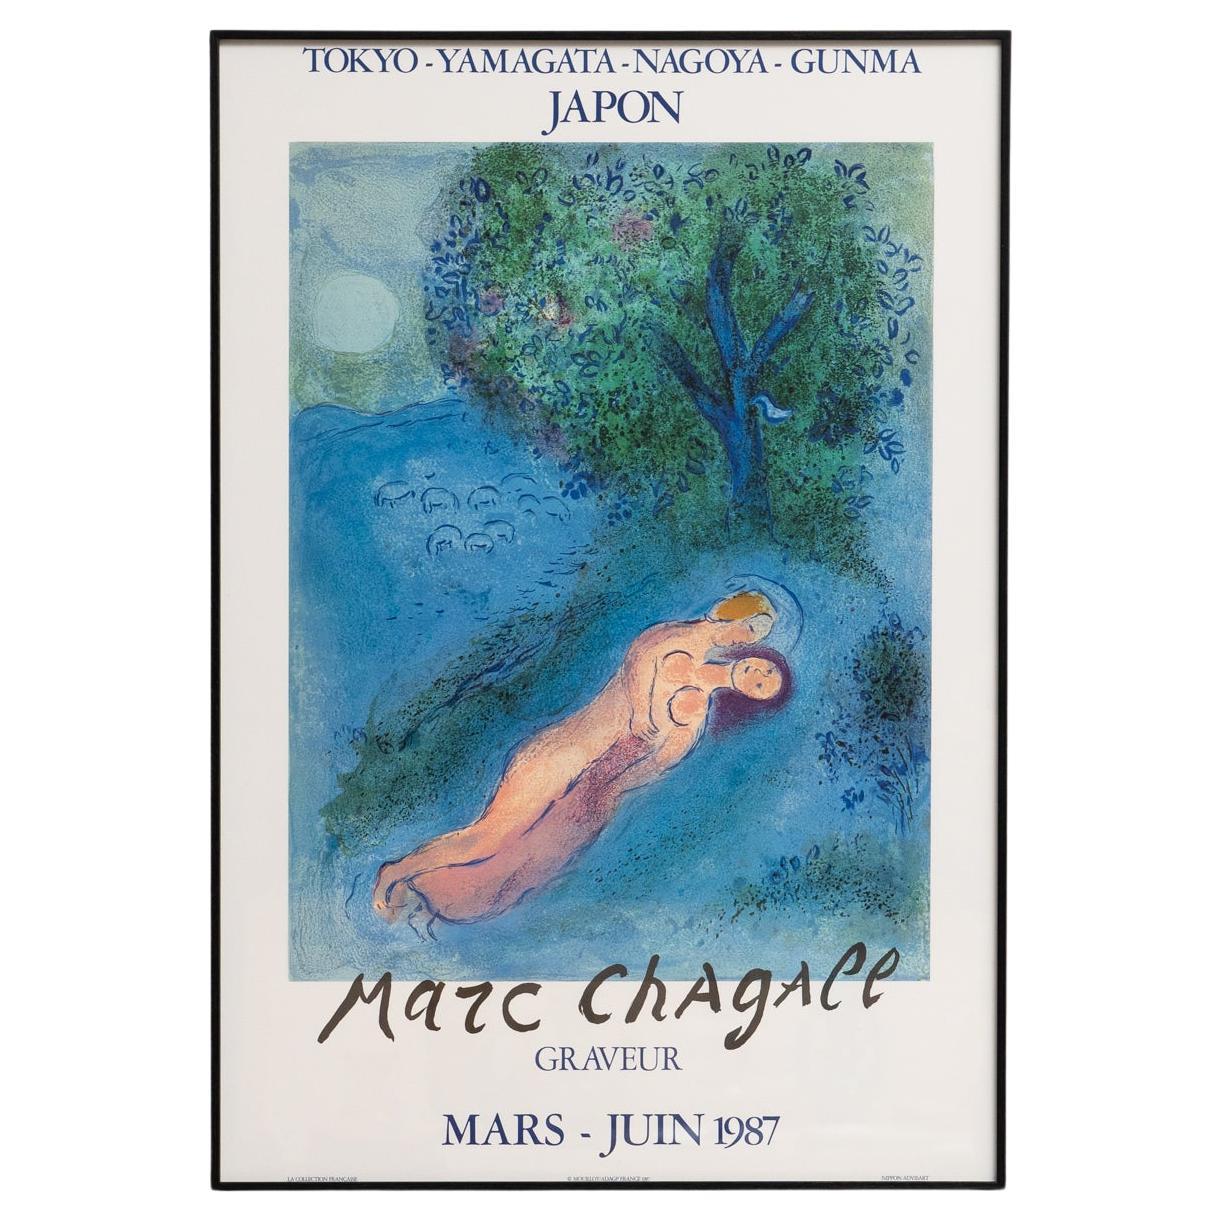 Colorful Marc Chagall Poster: Printed by Mourlot in 1987